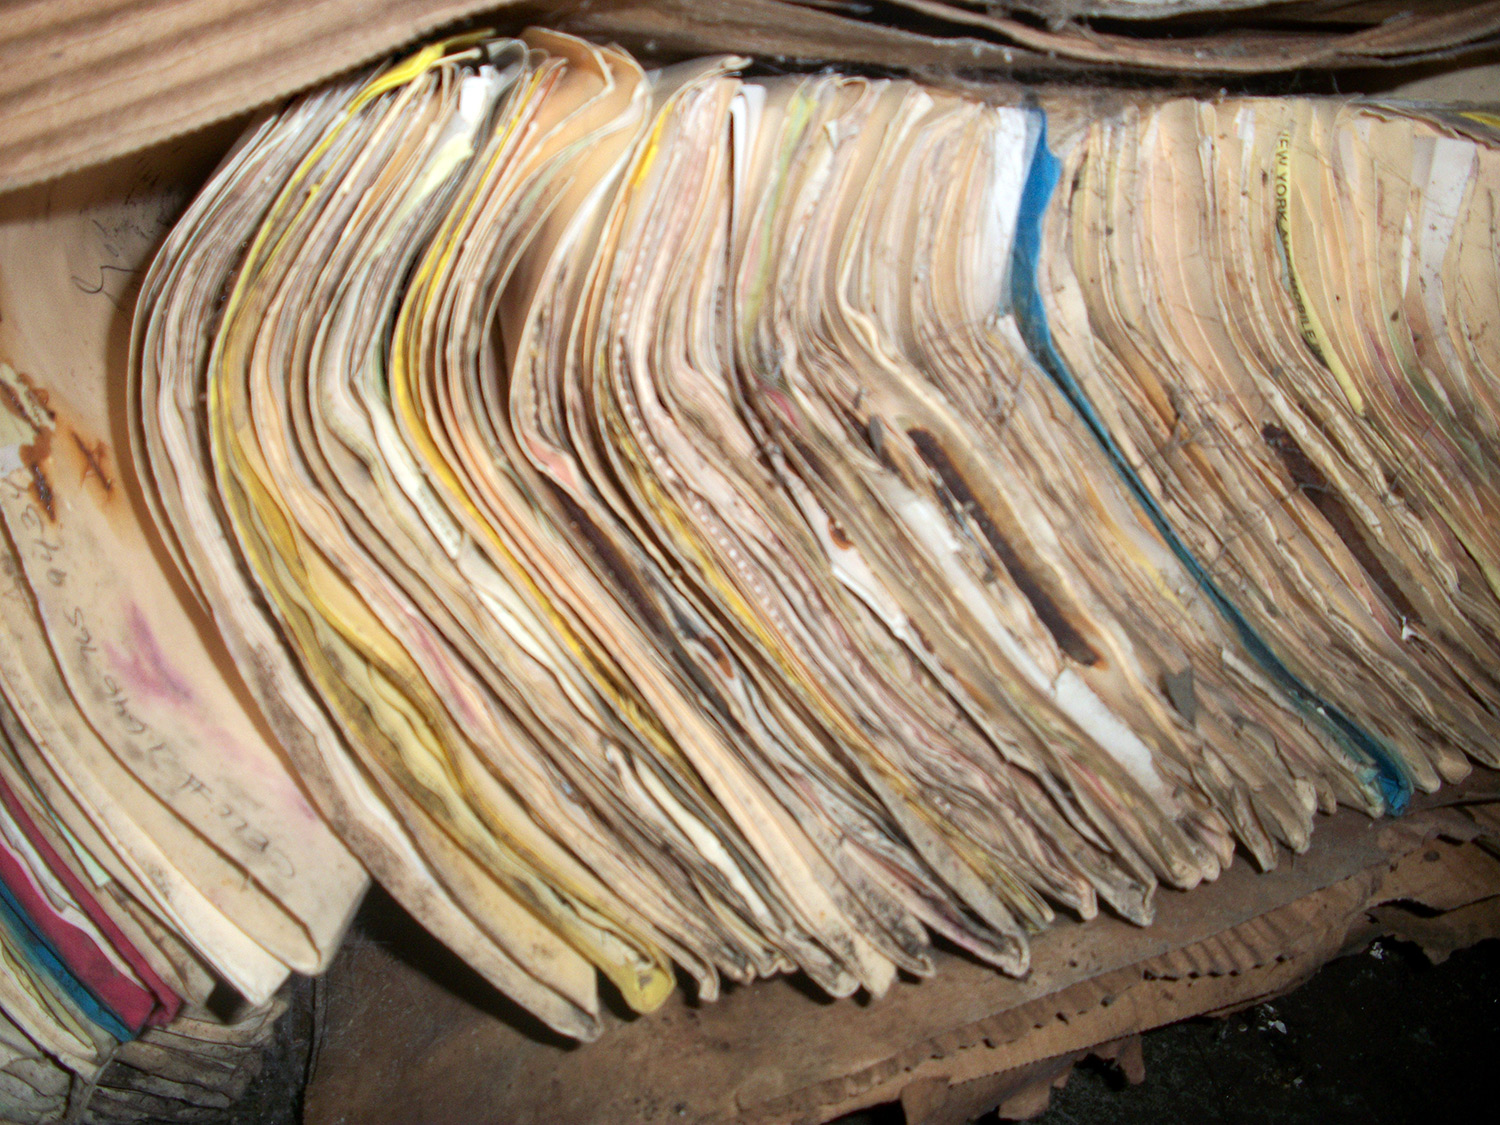 Water damaged cardboard box with paper folders and documents covered in mold and mildew